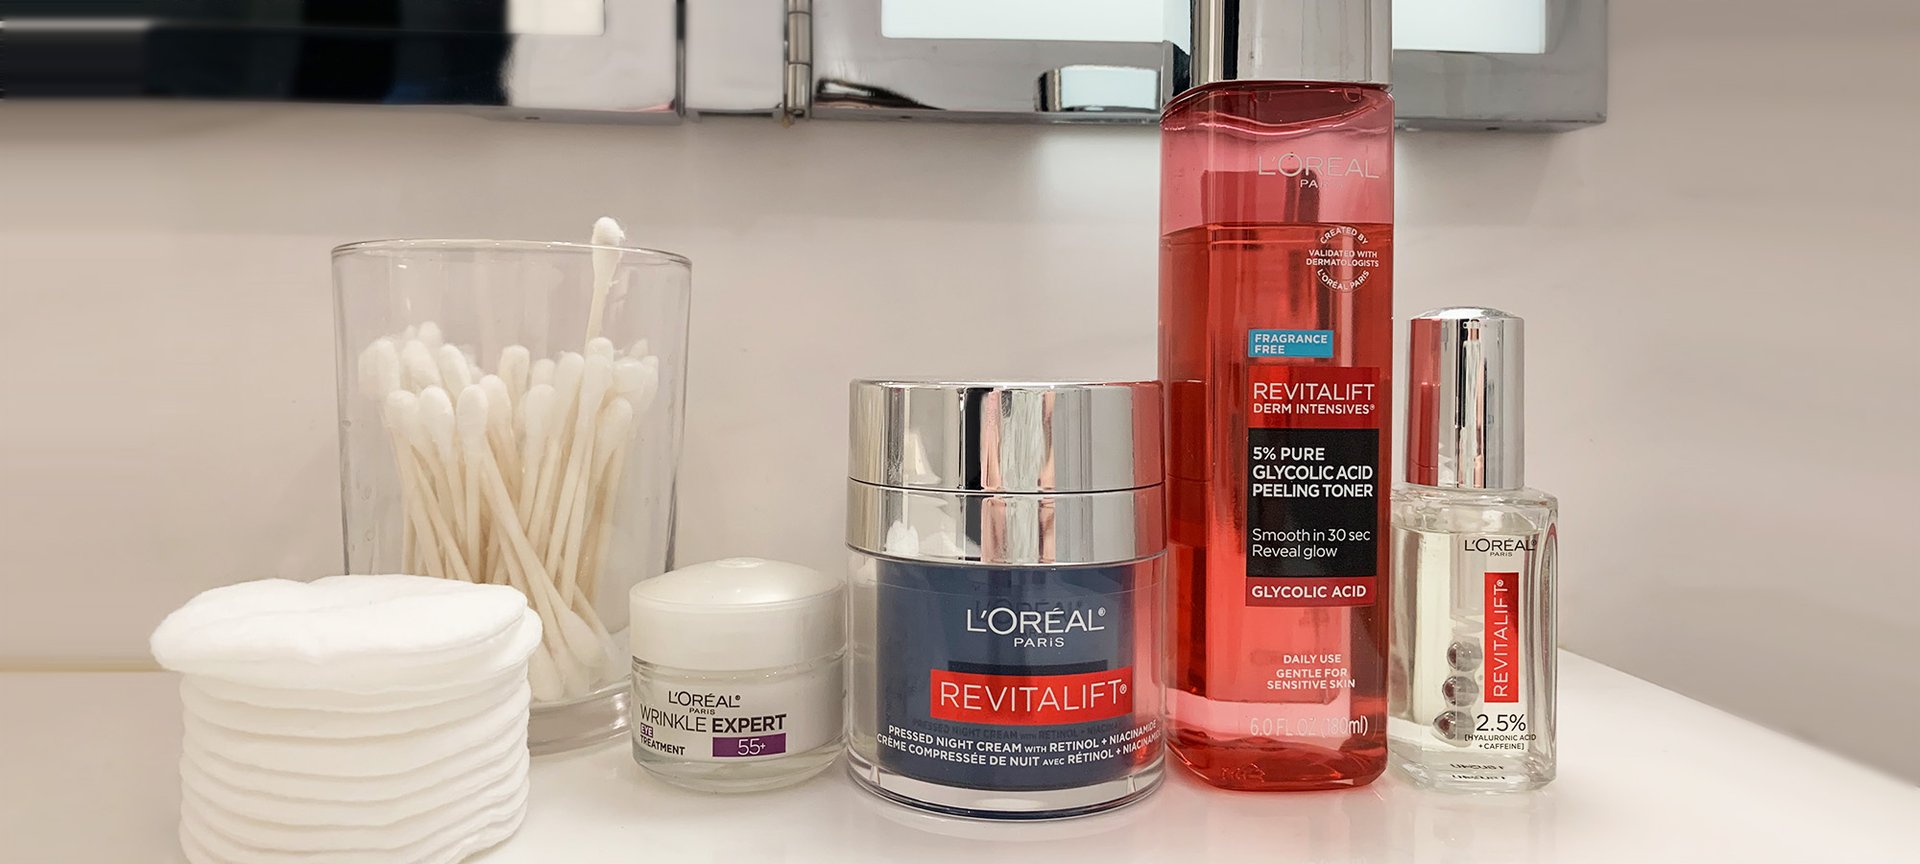 https://www.lorealparisusa.com/-/media/project/loreal/brand-sites/oap/americas/us/beauty-magazine/2022/february/2-4/where-to-store-skin-care/storing-skin-care-in-your-bathroom-cms-02-bmag.jpg